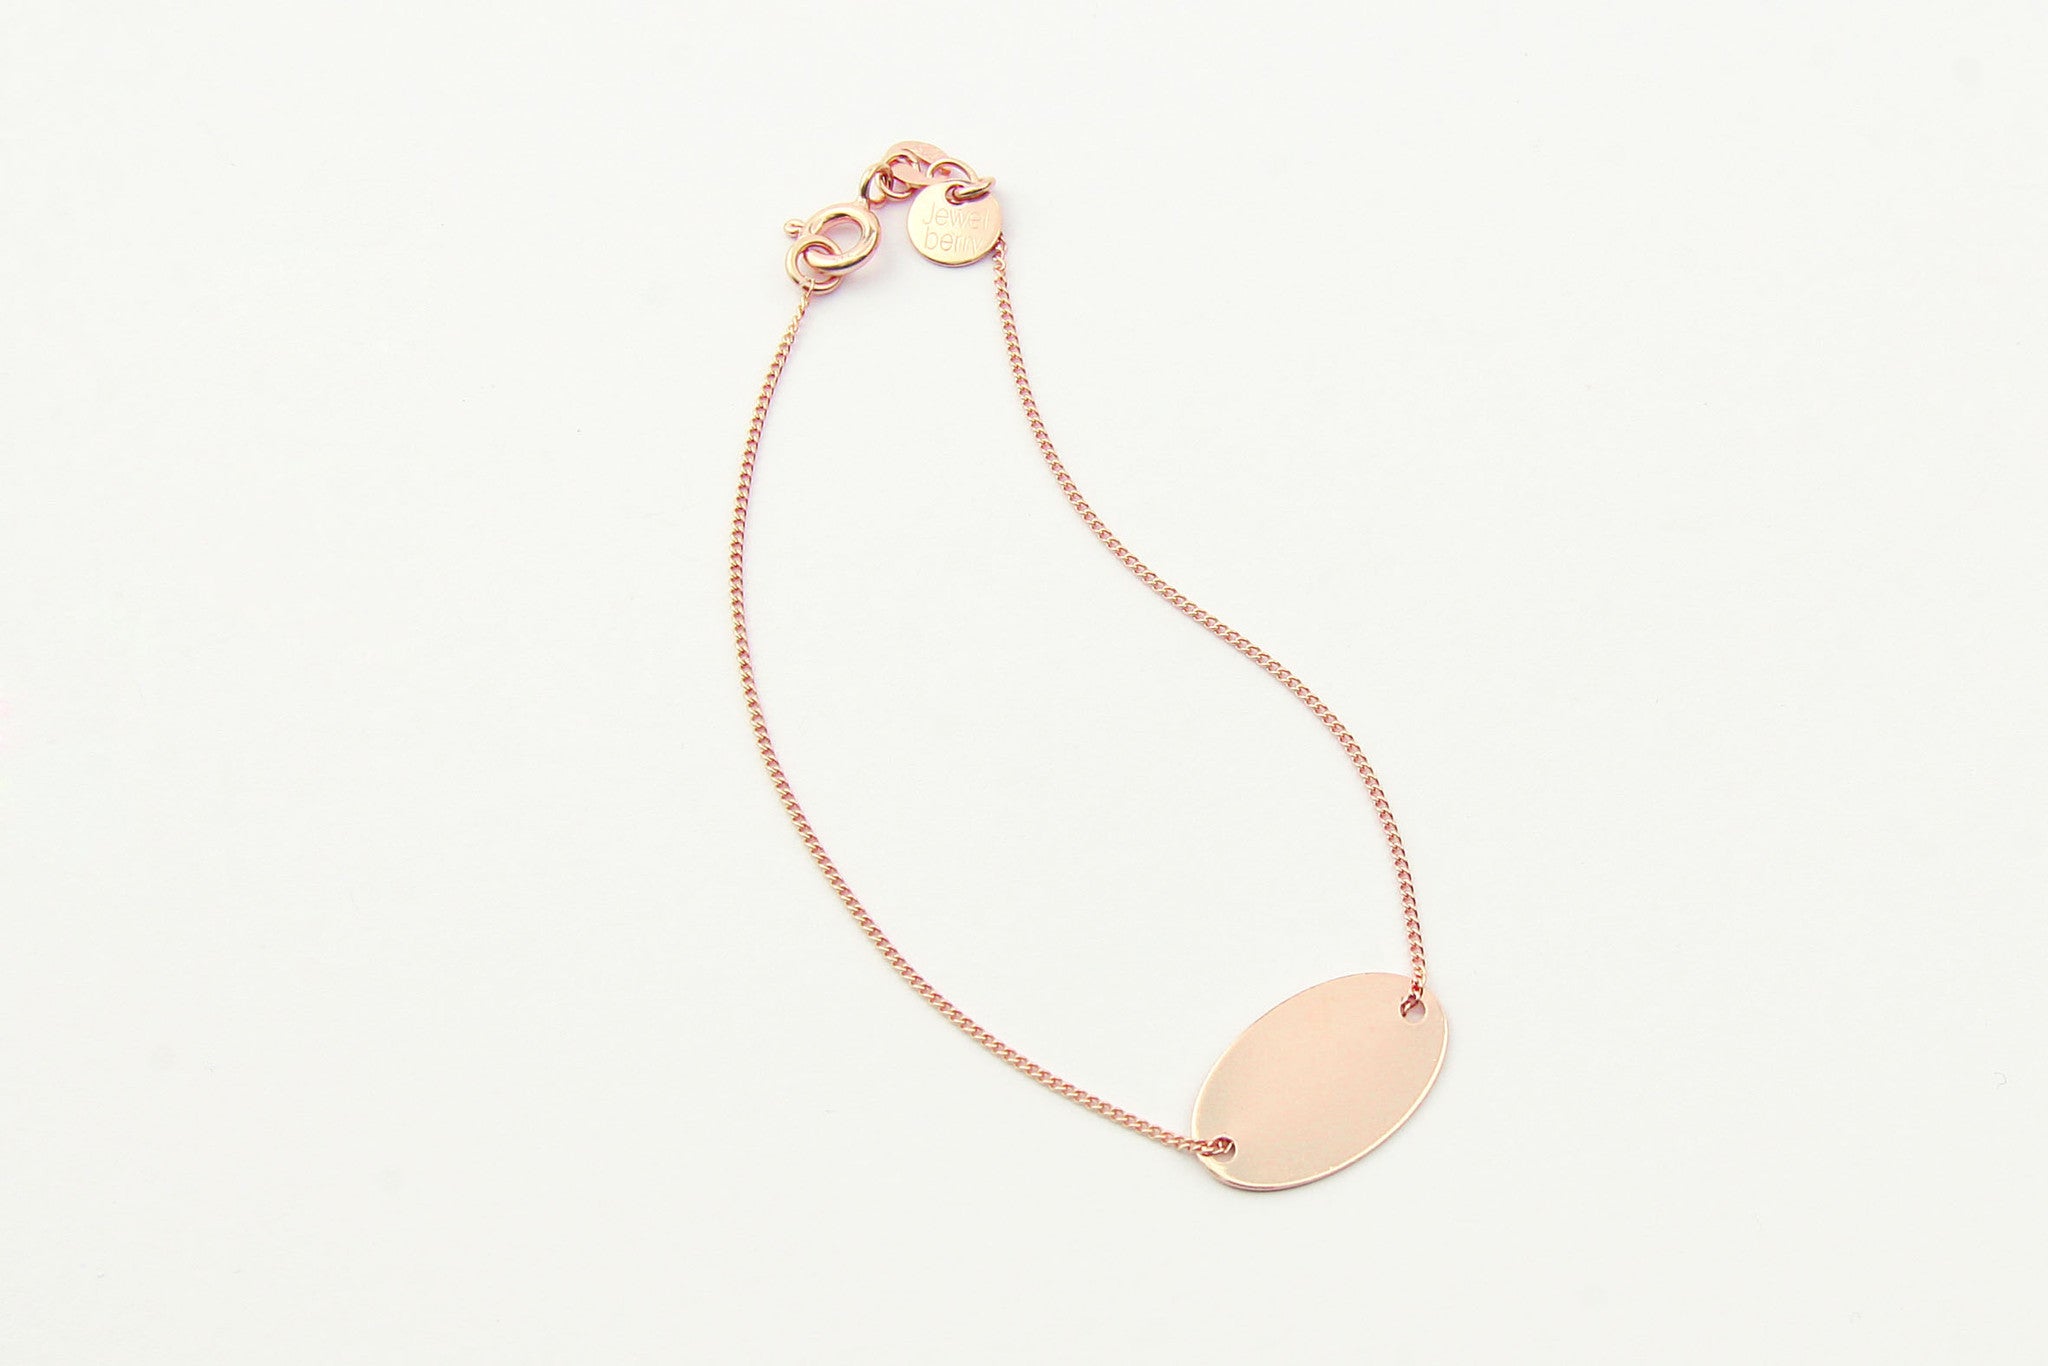 jewelberry armband bracelet oval disc double rose gold plated sterling silver fine jewelry handmade with love fairtrade curb chain